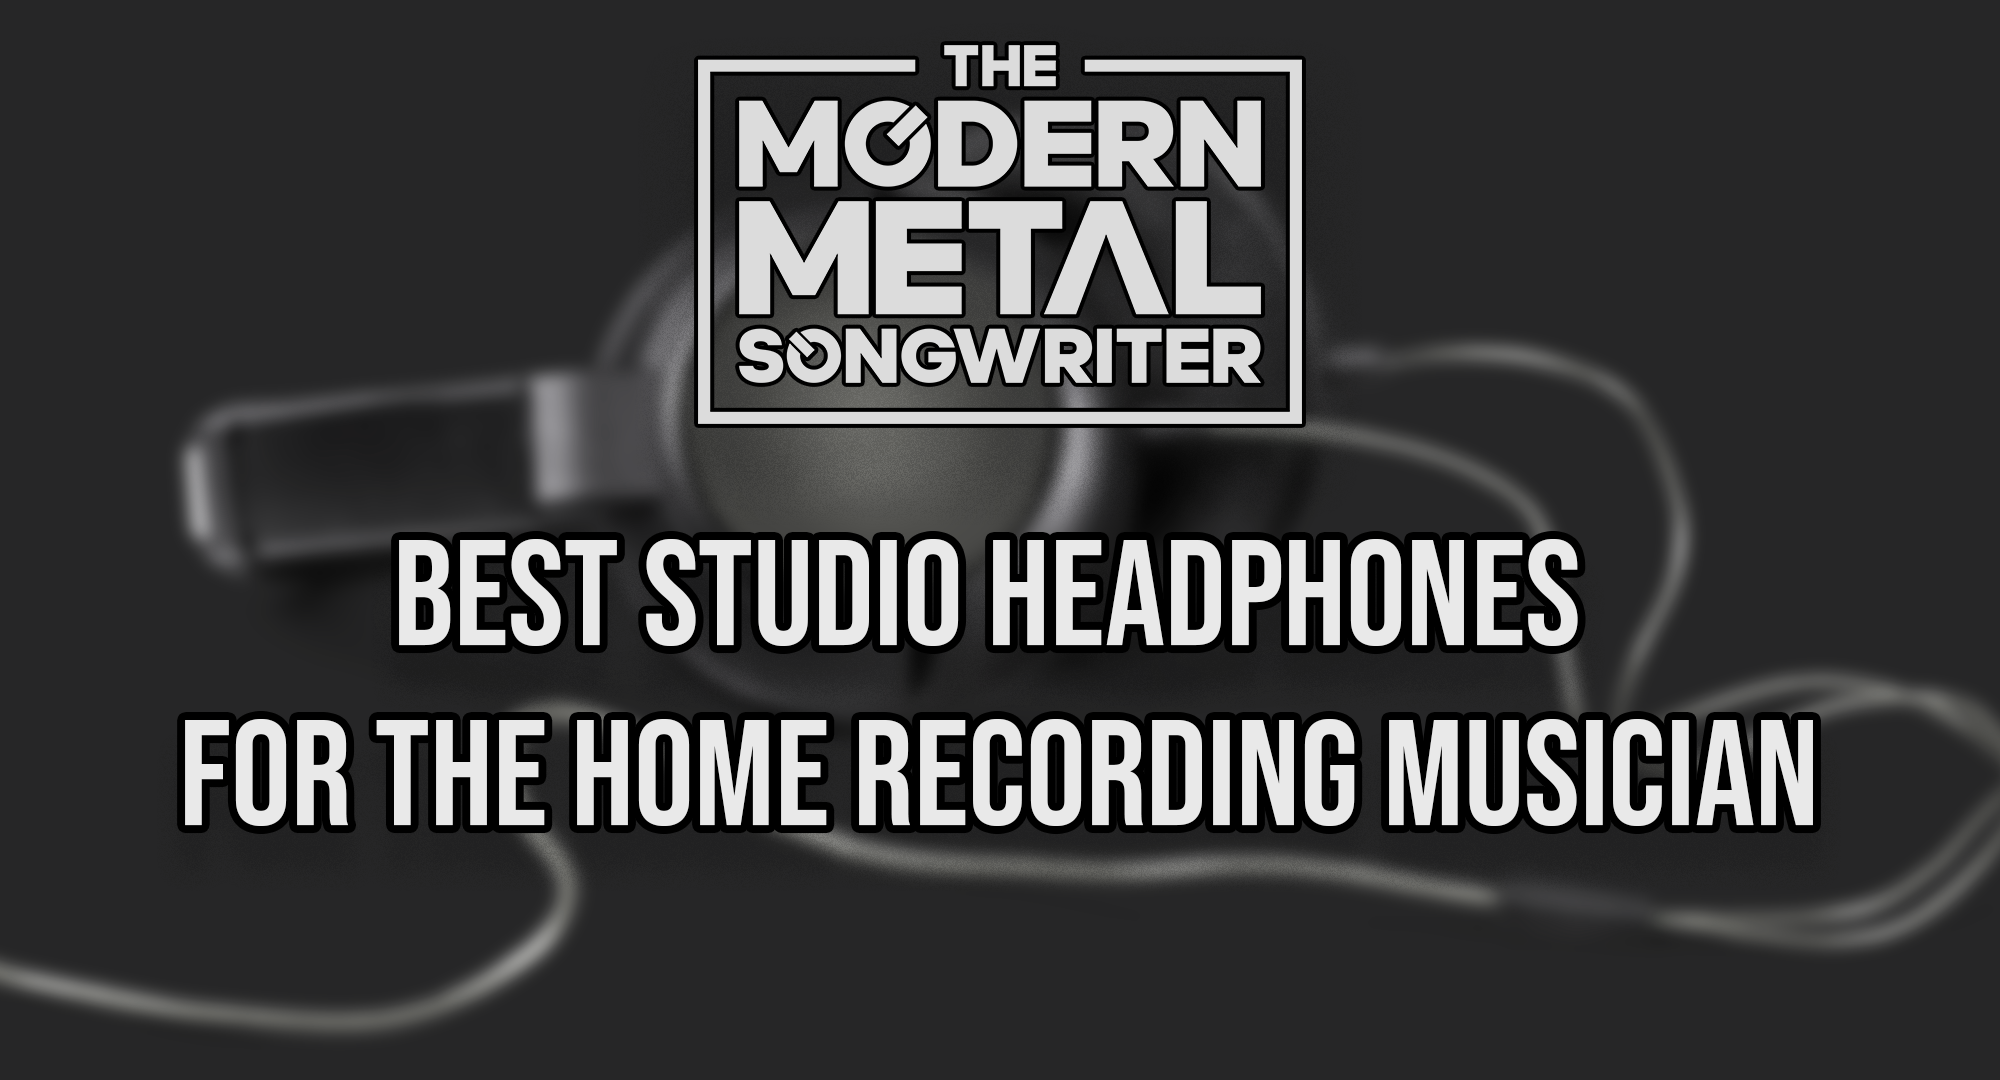 Best-Studio-Headphones-for-the-Home-Recording-Musician ModernMetalSongwriter graphic